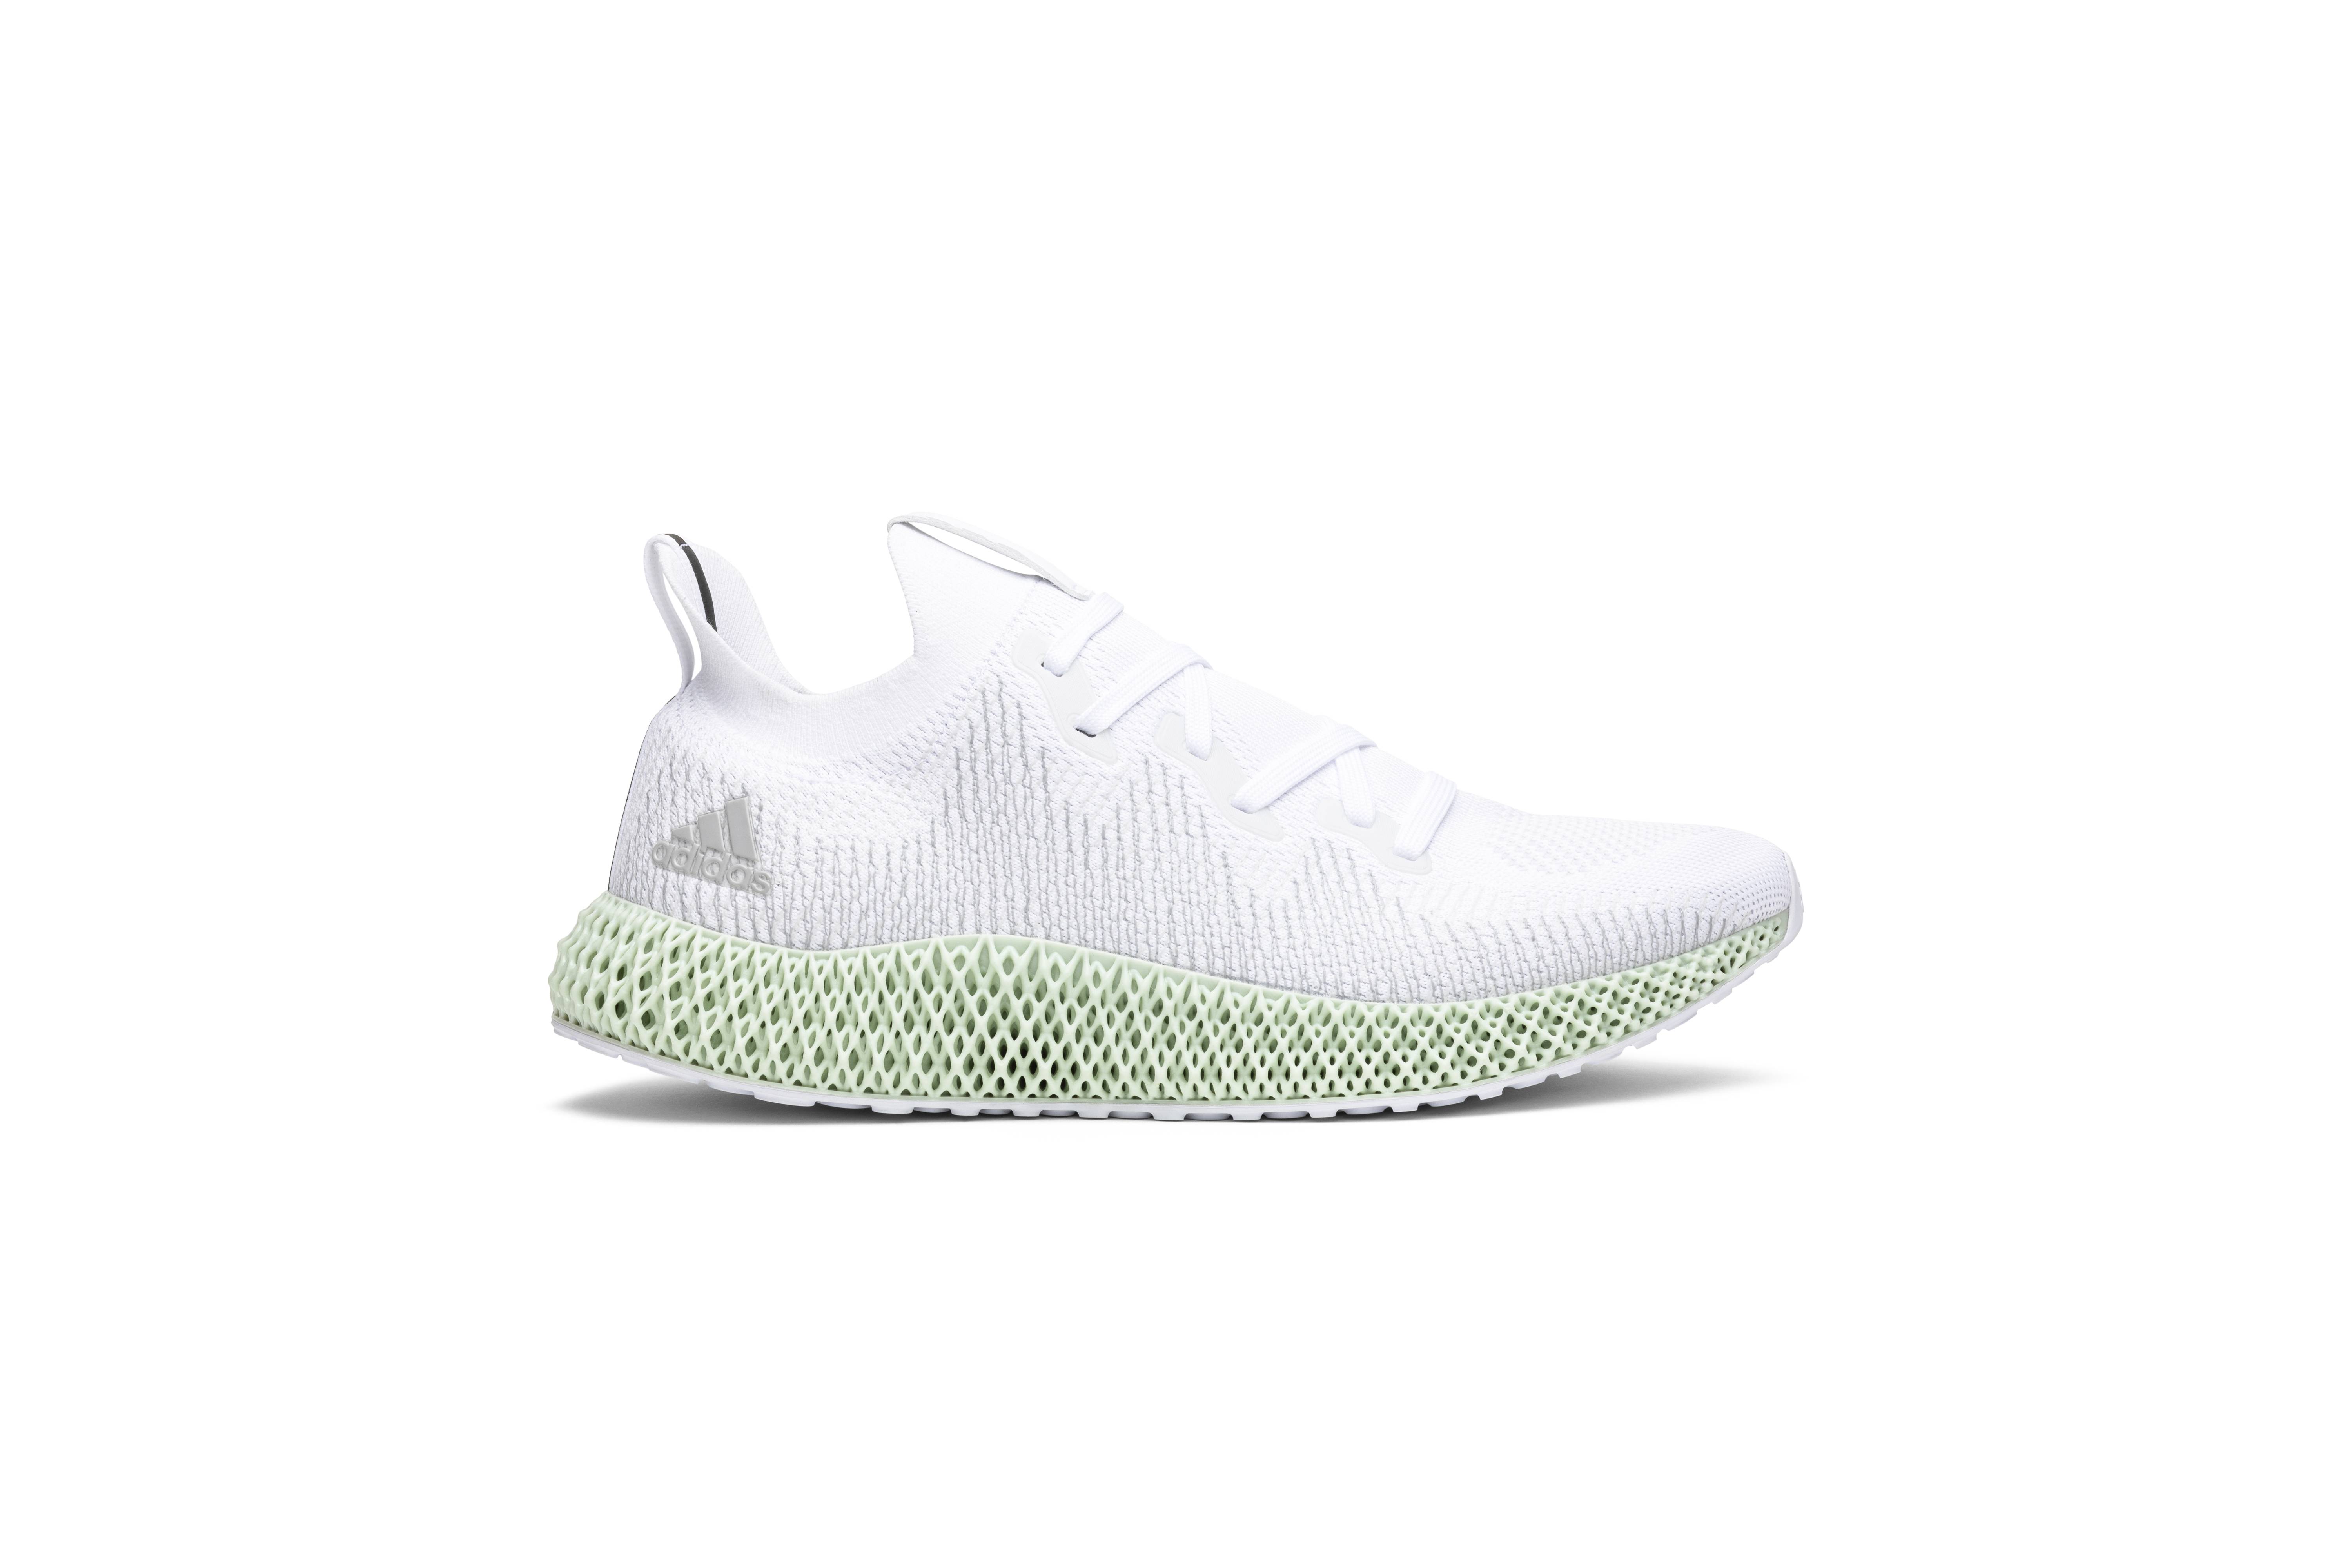 Adidas alphaedge 4D size 8US, Men's Fashion, Footwear, Sneakers on Carousell